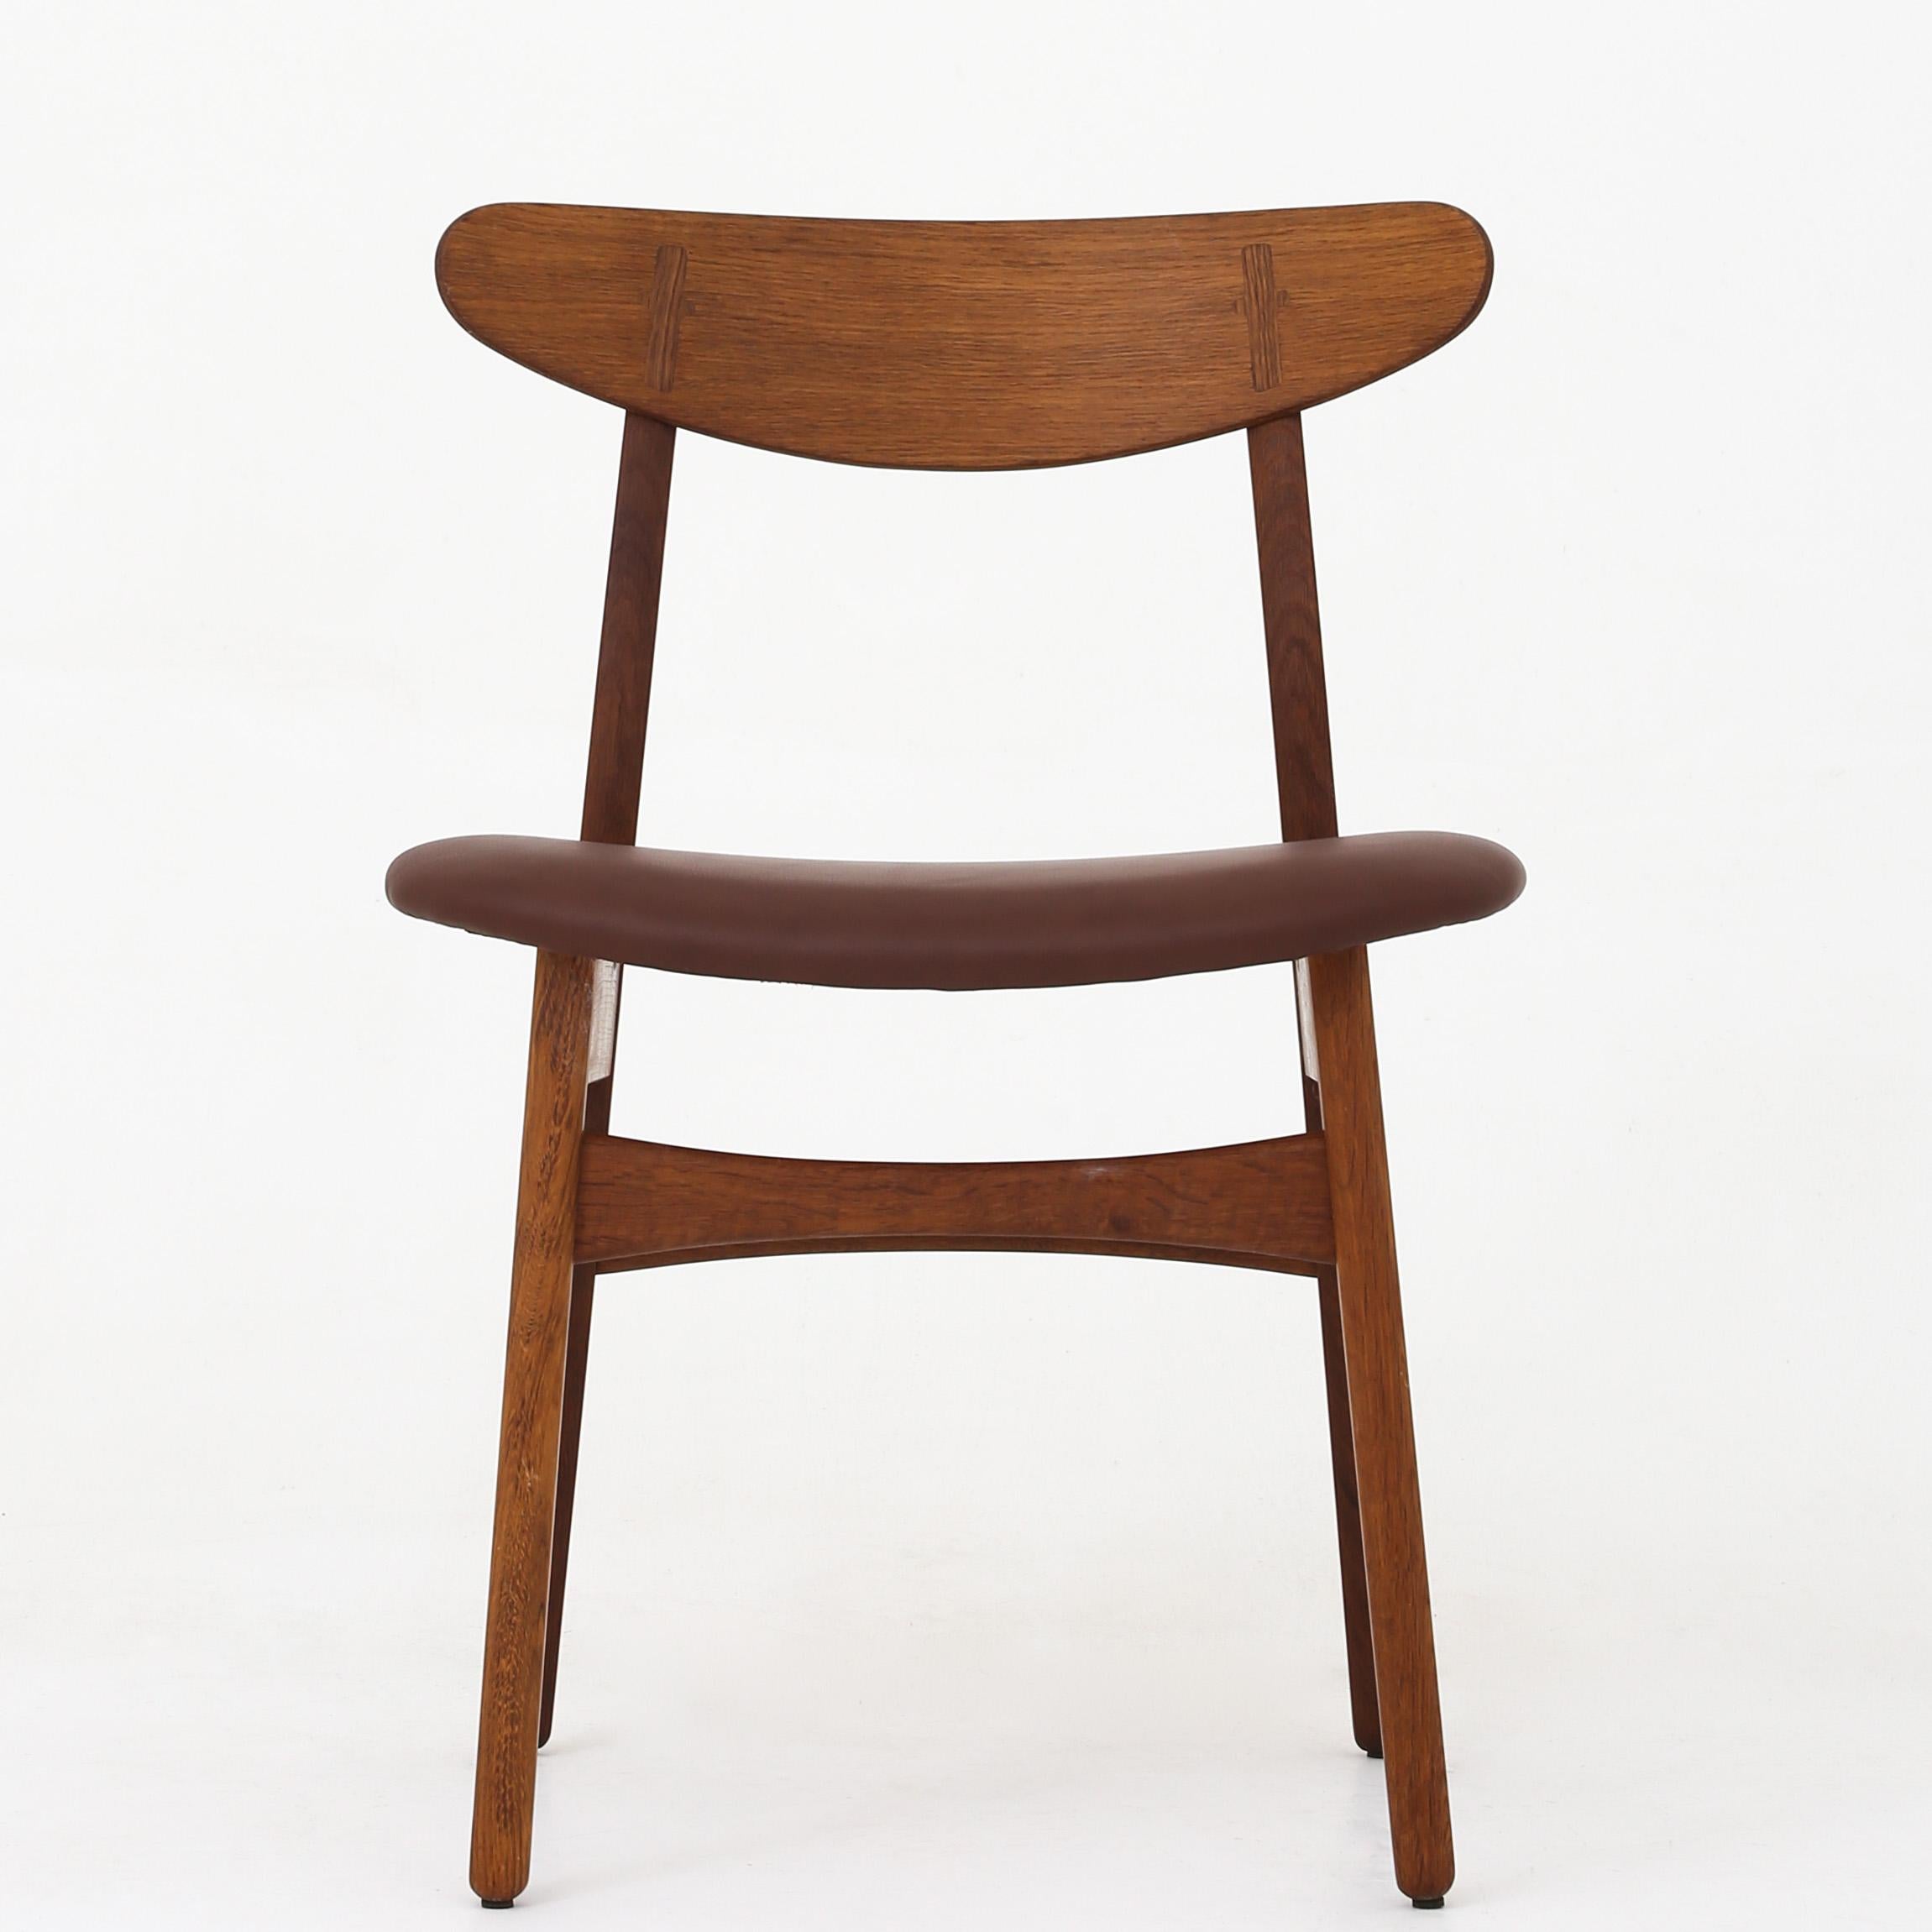 Hans J. Wegner set of 6 CH 30 - Dining chairs in solid oak with brown leather seat. Maker Carl Hansen.